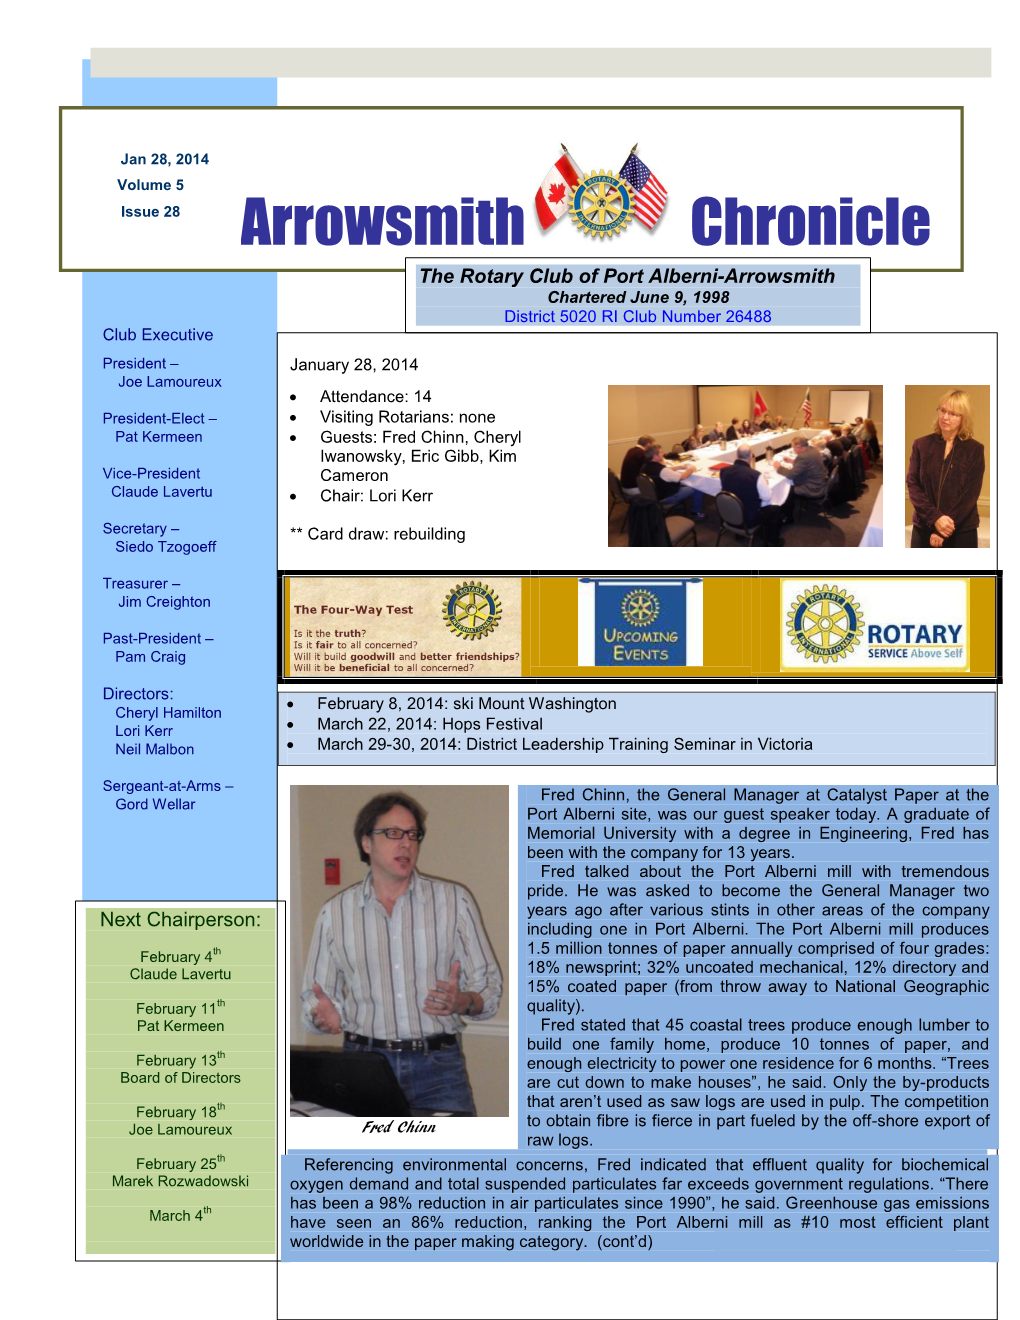 Arrowsmith Chronicle the Rotary Club of Port Alberni-Arrowsmith Chartered June 9, 1998 District 5020 RI Club Number 26488